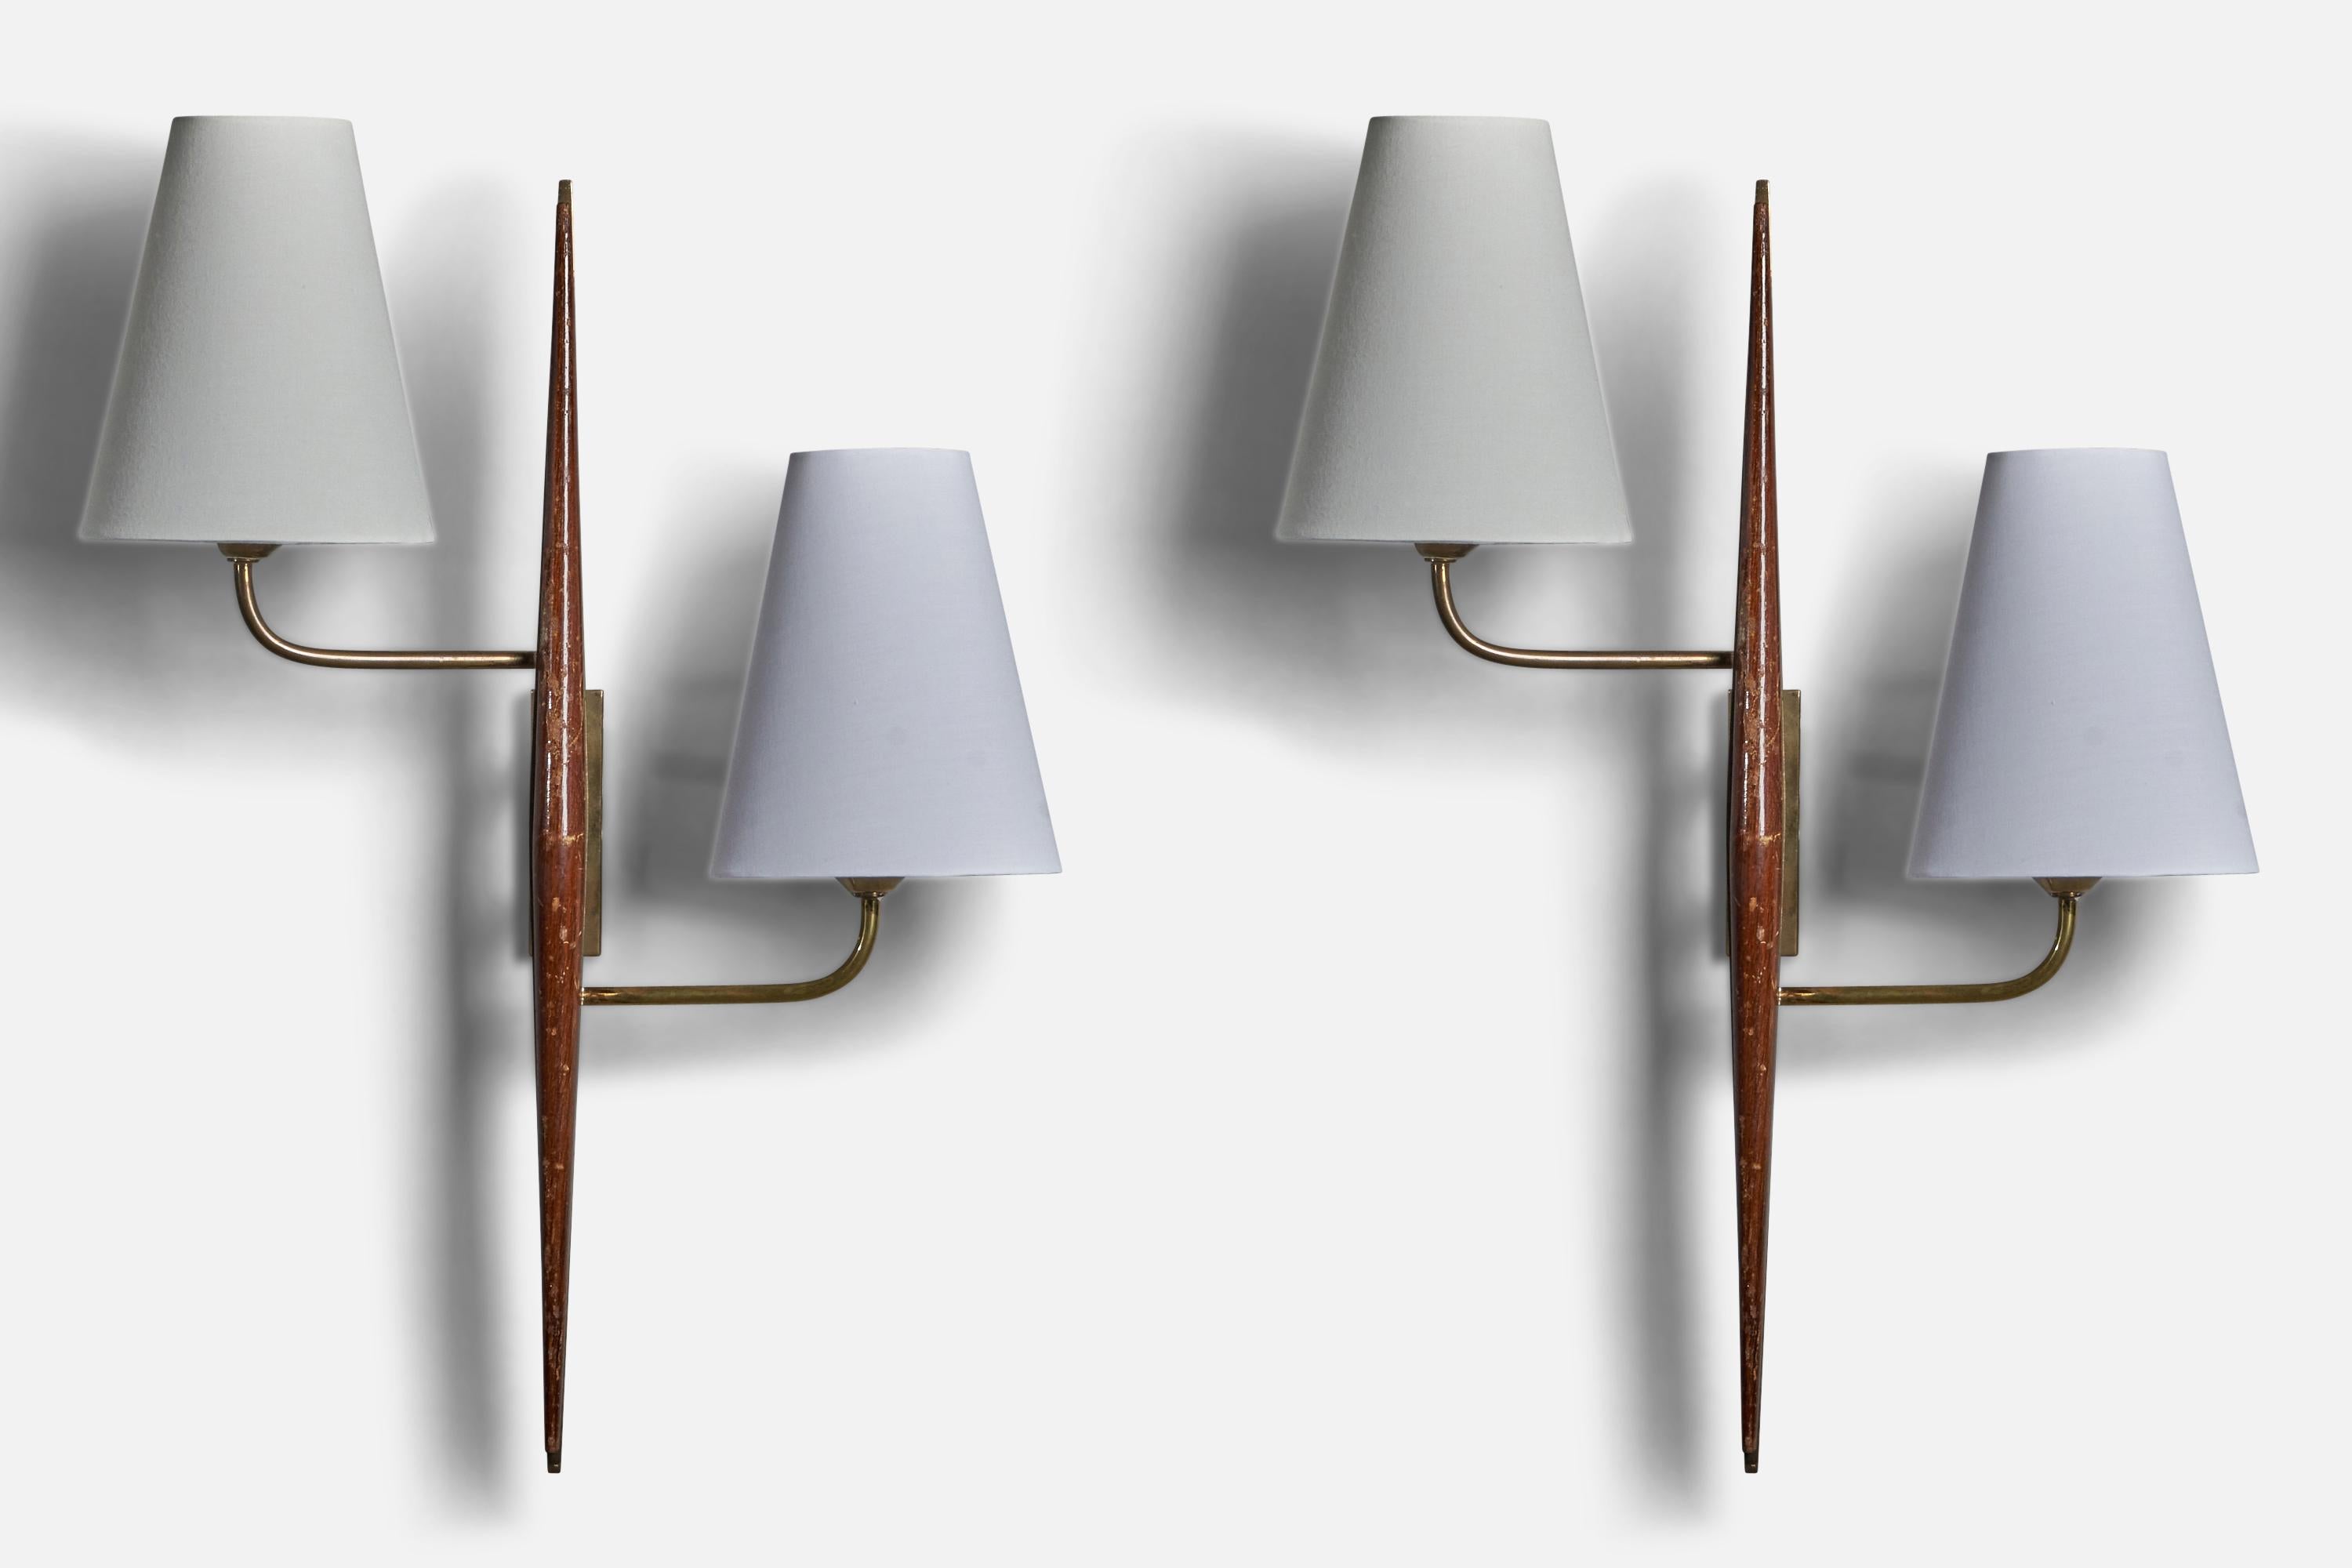 A pair of two-armed brass, wood and white fabric wall lights designed and produced in Italy, 1940s.

Overall Dimensions (inches): 21” H x 15” W x 6.75” D
Back Plate Dimensions (inches): 1.15” W x 4.4” H
Bulb Specifications: E-12 Bulb
Number of